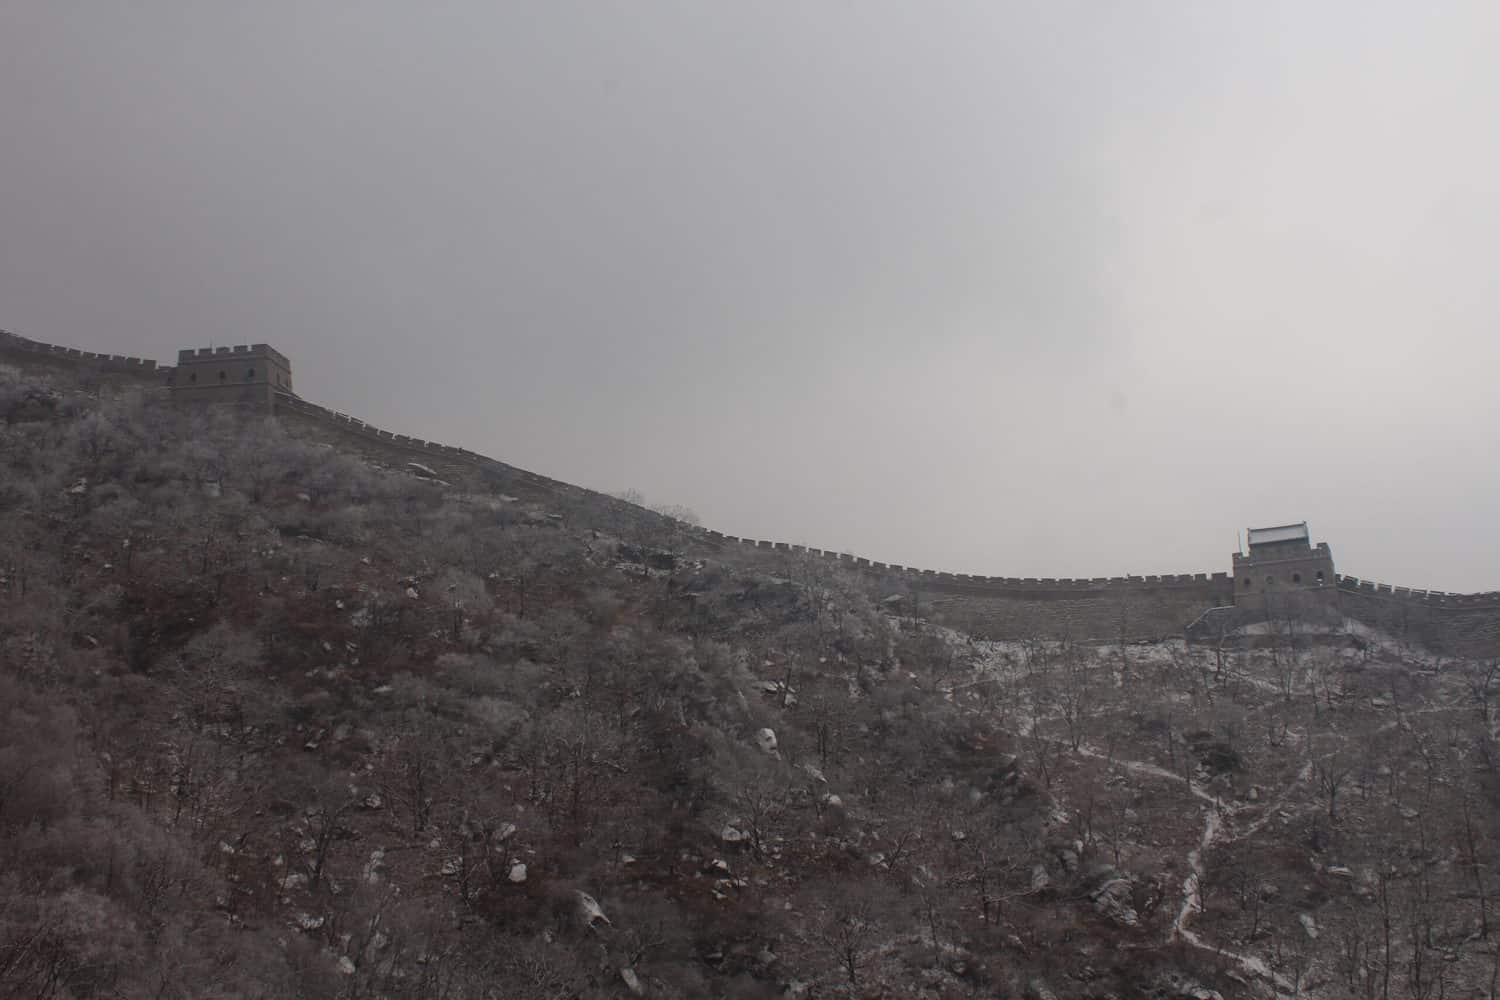 First view of the Great Wall of China, Mutianyu, Beijing